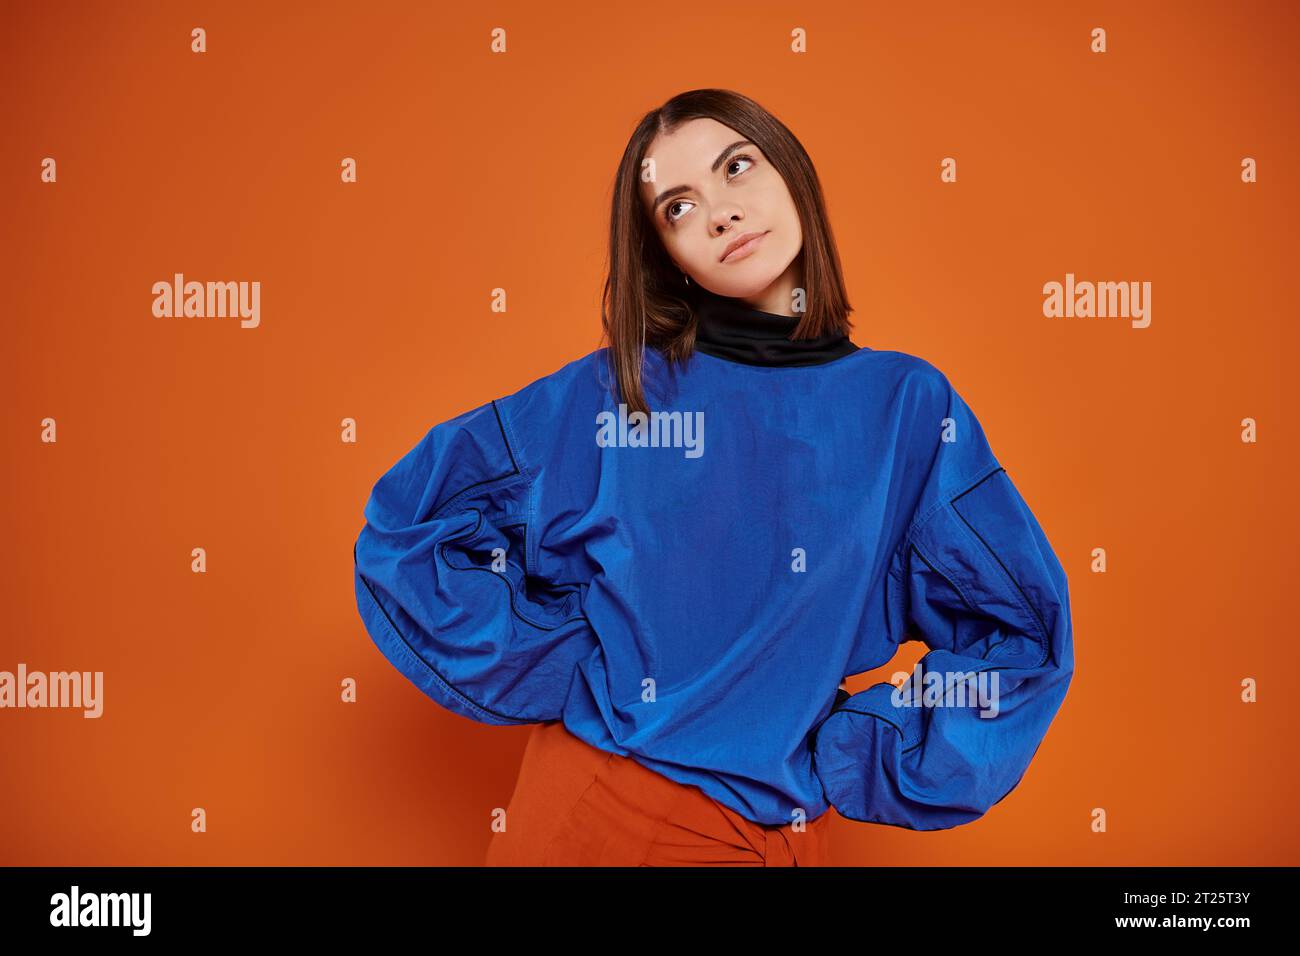 displeased young woman with pierced nose standing with hands on hips on orange backdrop, look away Stock Photo